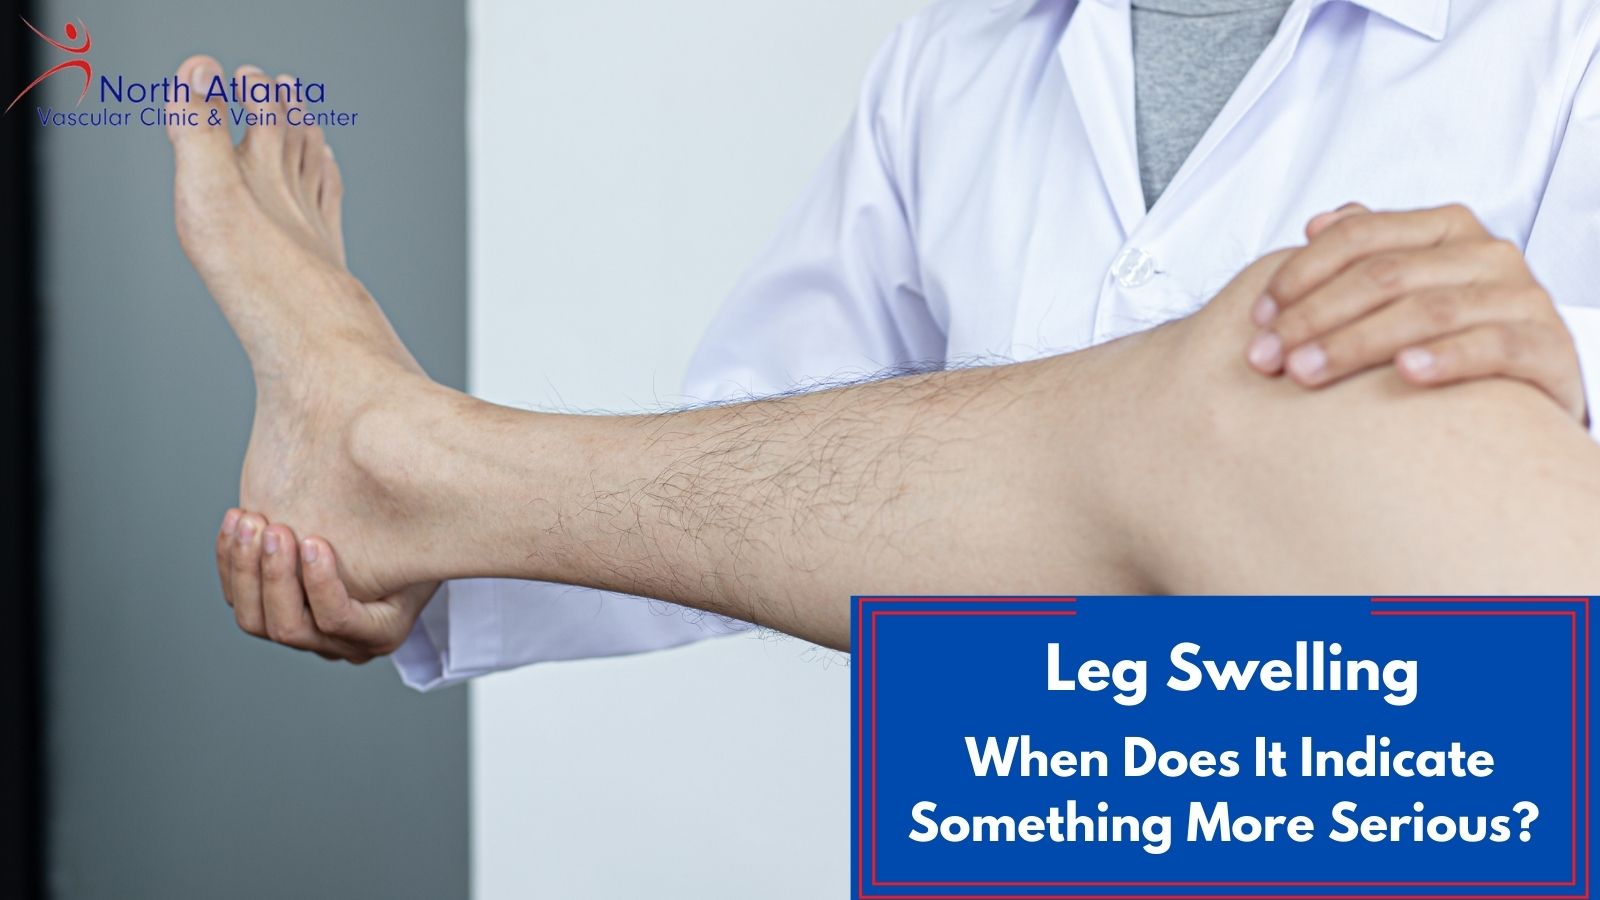 Leg Swelling: When Does It Indicate Something More Serious?